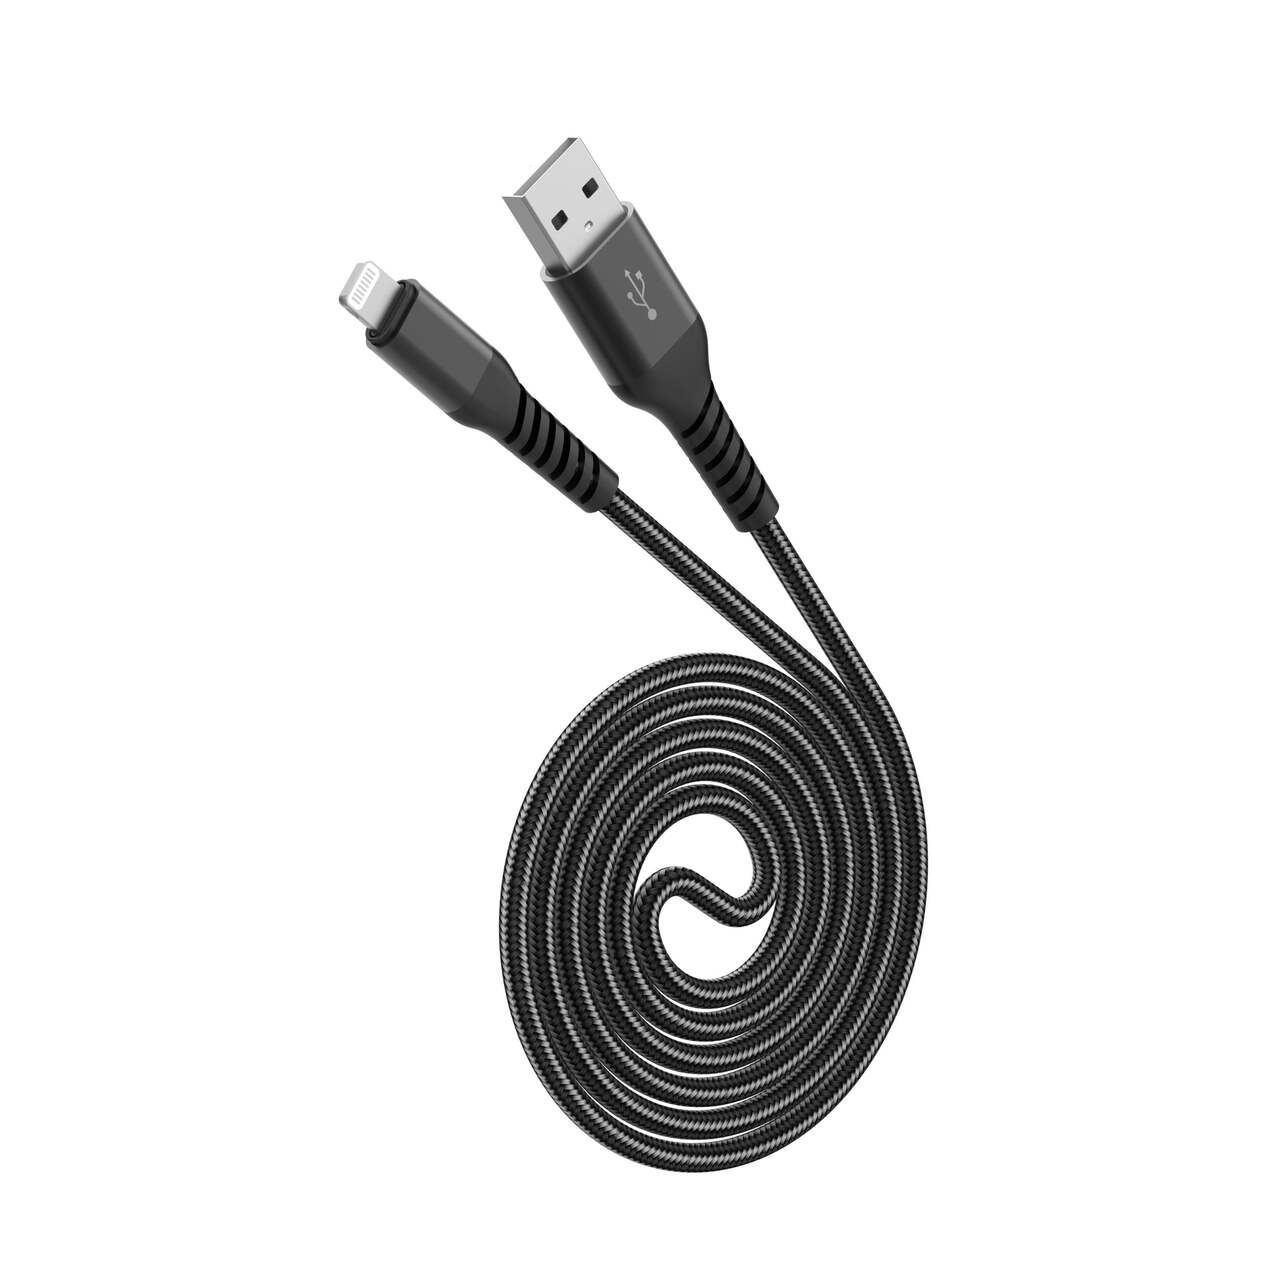 Bluehive Durable USB-A to Lightning Cable, Made With Dupont Kevlar  Material, Black, 3-ft